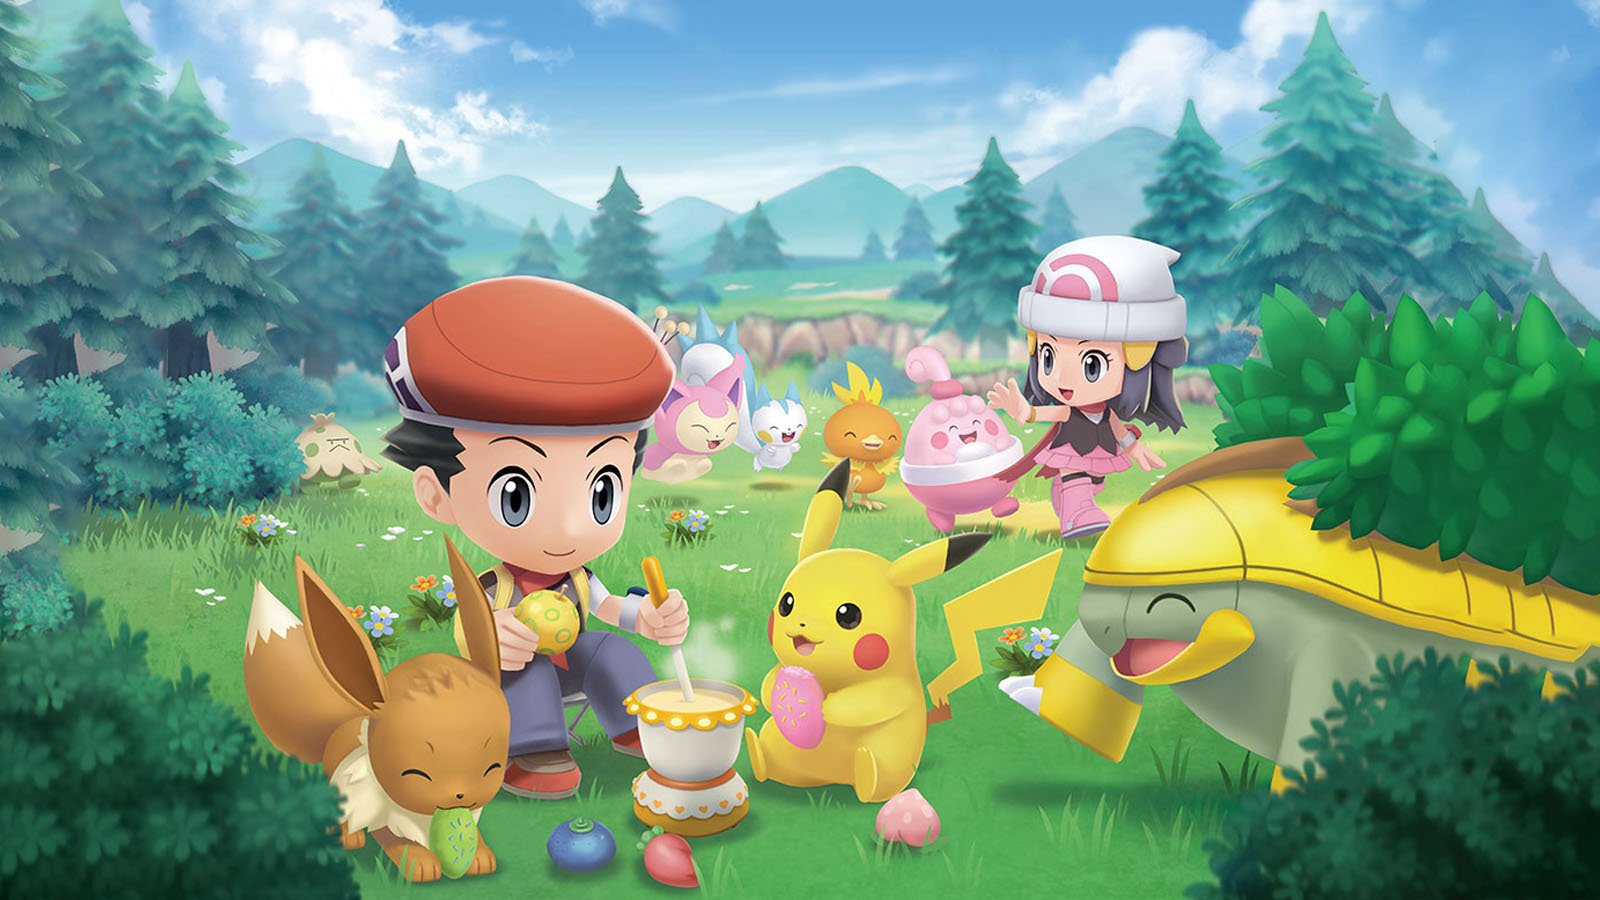 Pokémon - Attention, Trainers: A new software update (v 1.1.1) is available  ahead of the release of Pokémon Brilliant Diamond and Pokémon Shining Pearl.  Please download the update before playing. See here